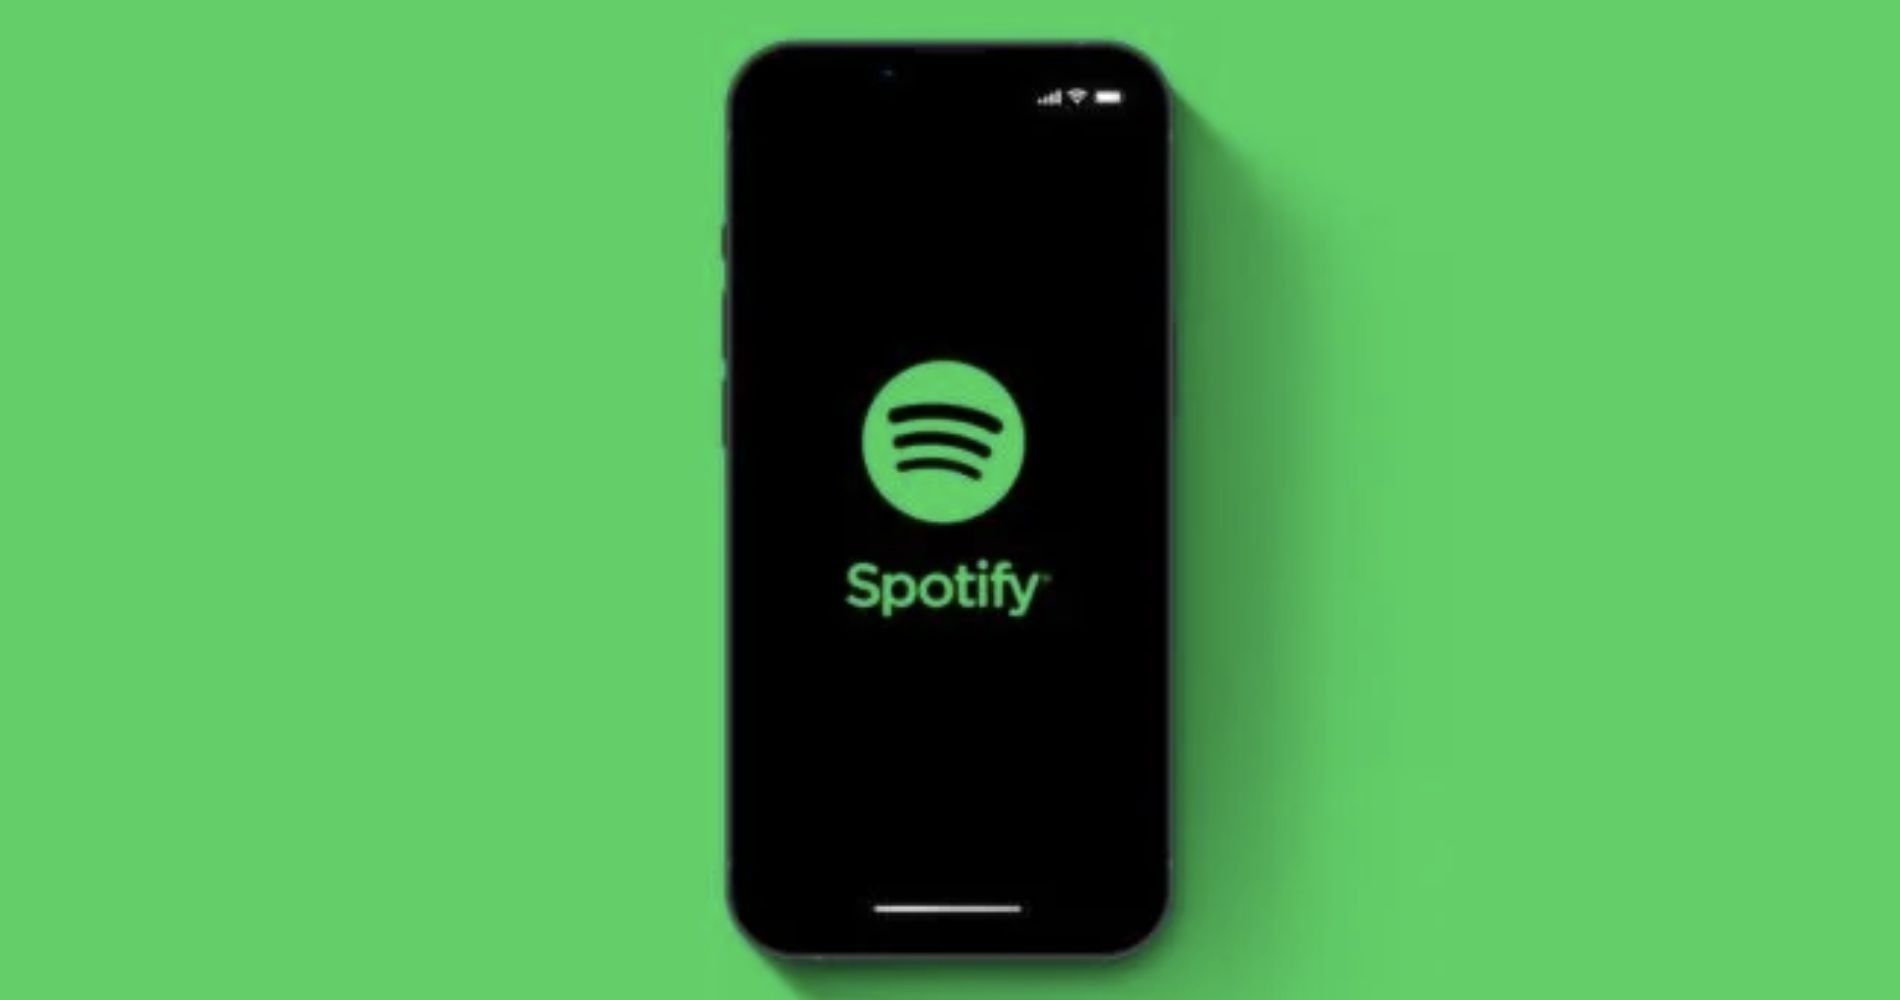 Spotify has closed the acquisition of digital audiobook distribution company Findaway